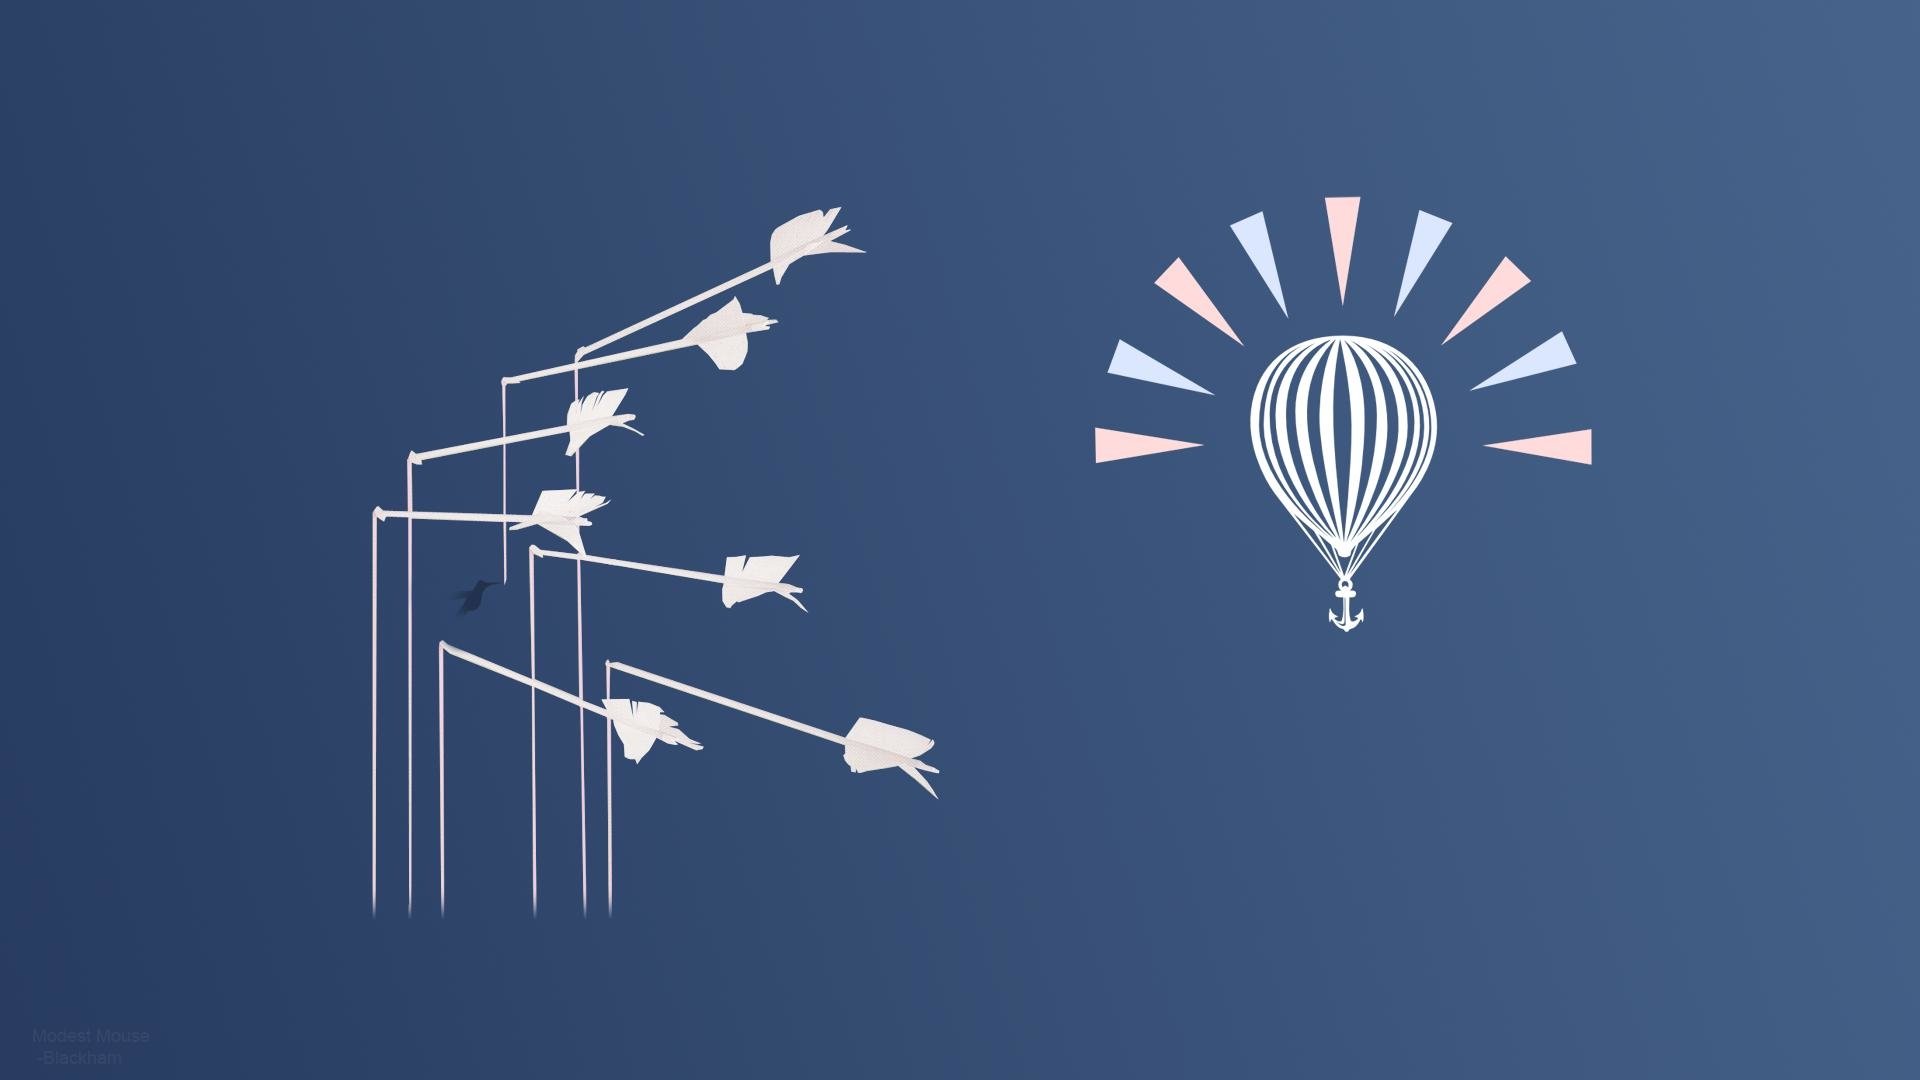 Modest Mouse Wallpapers